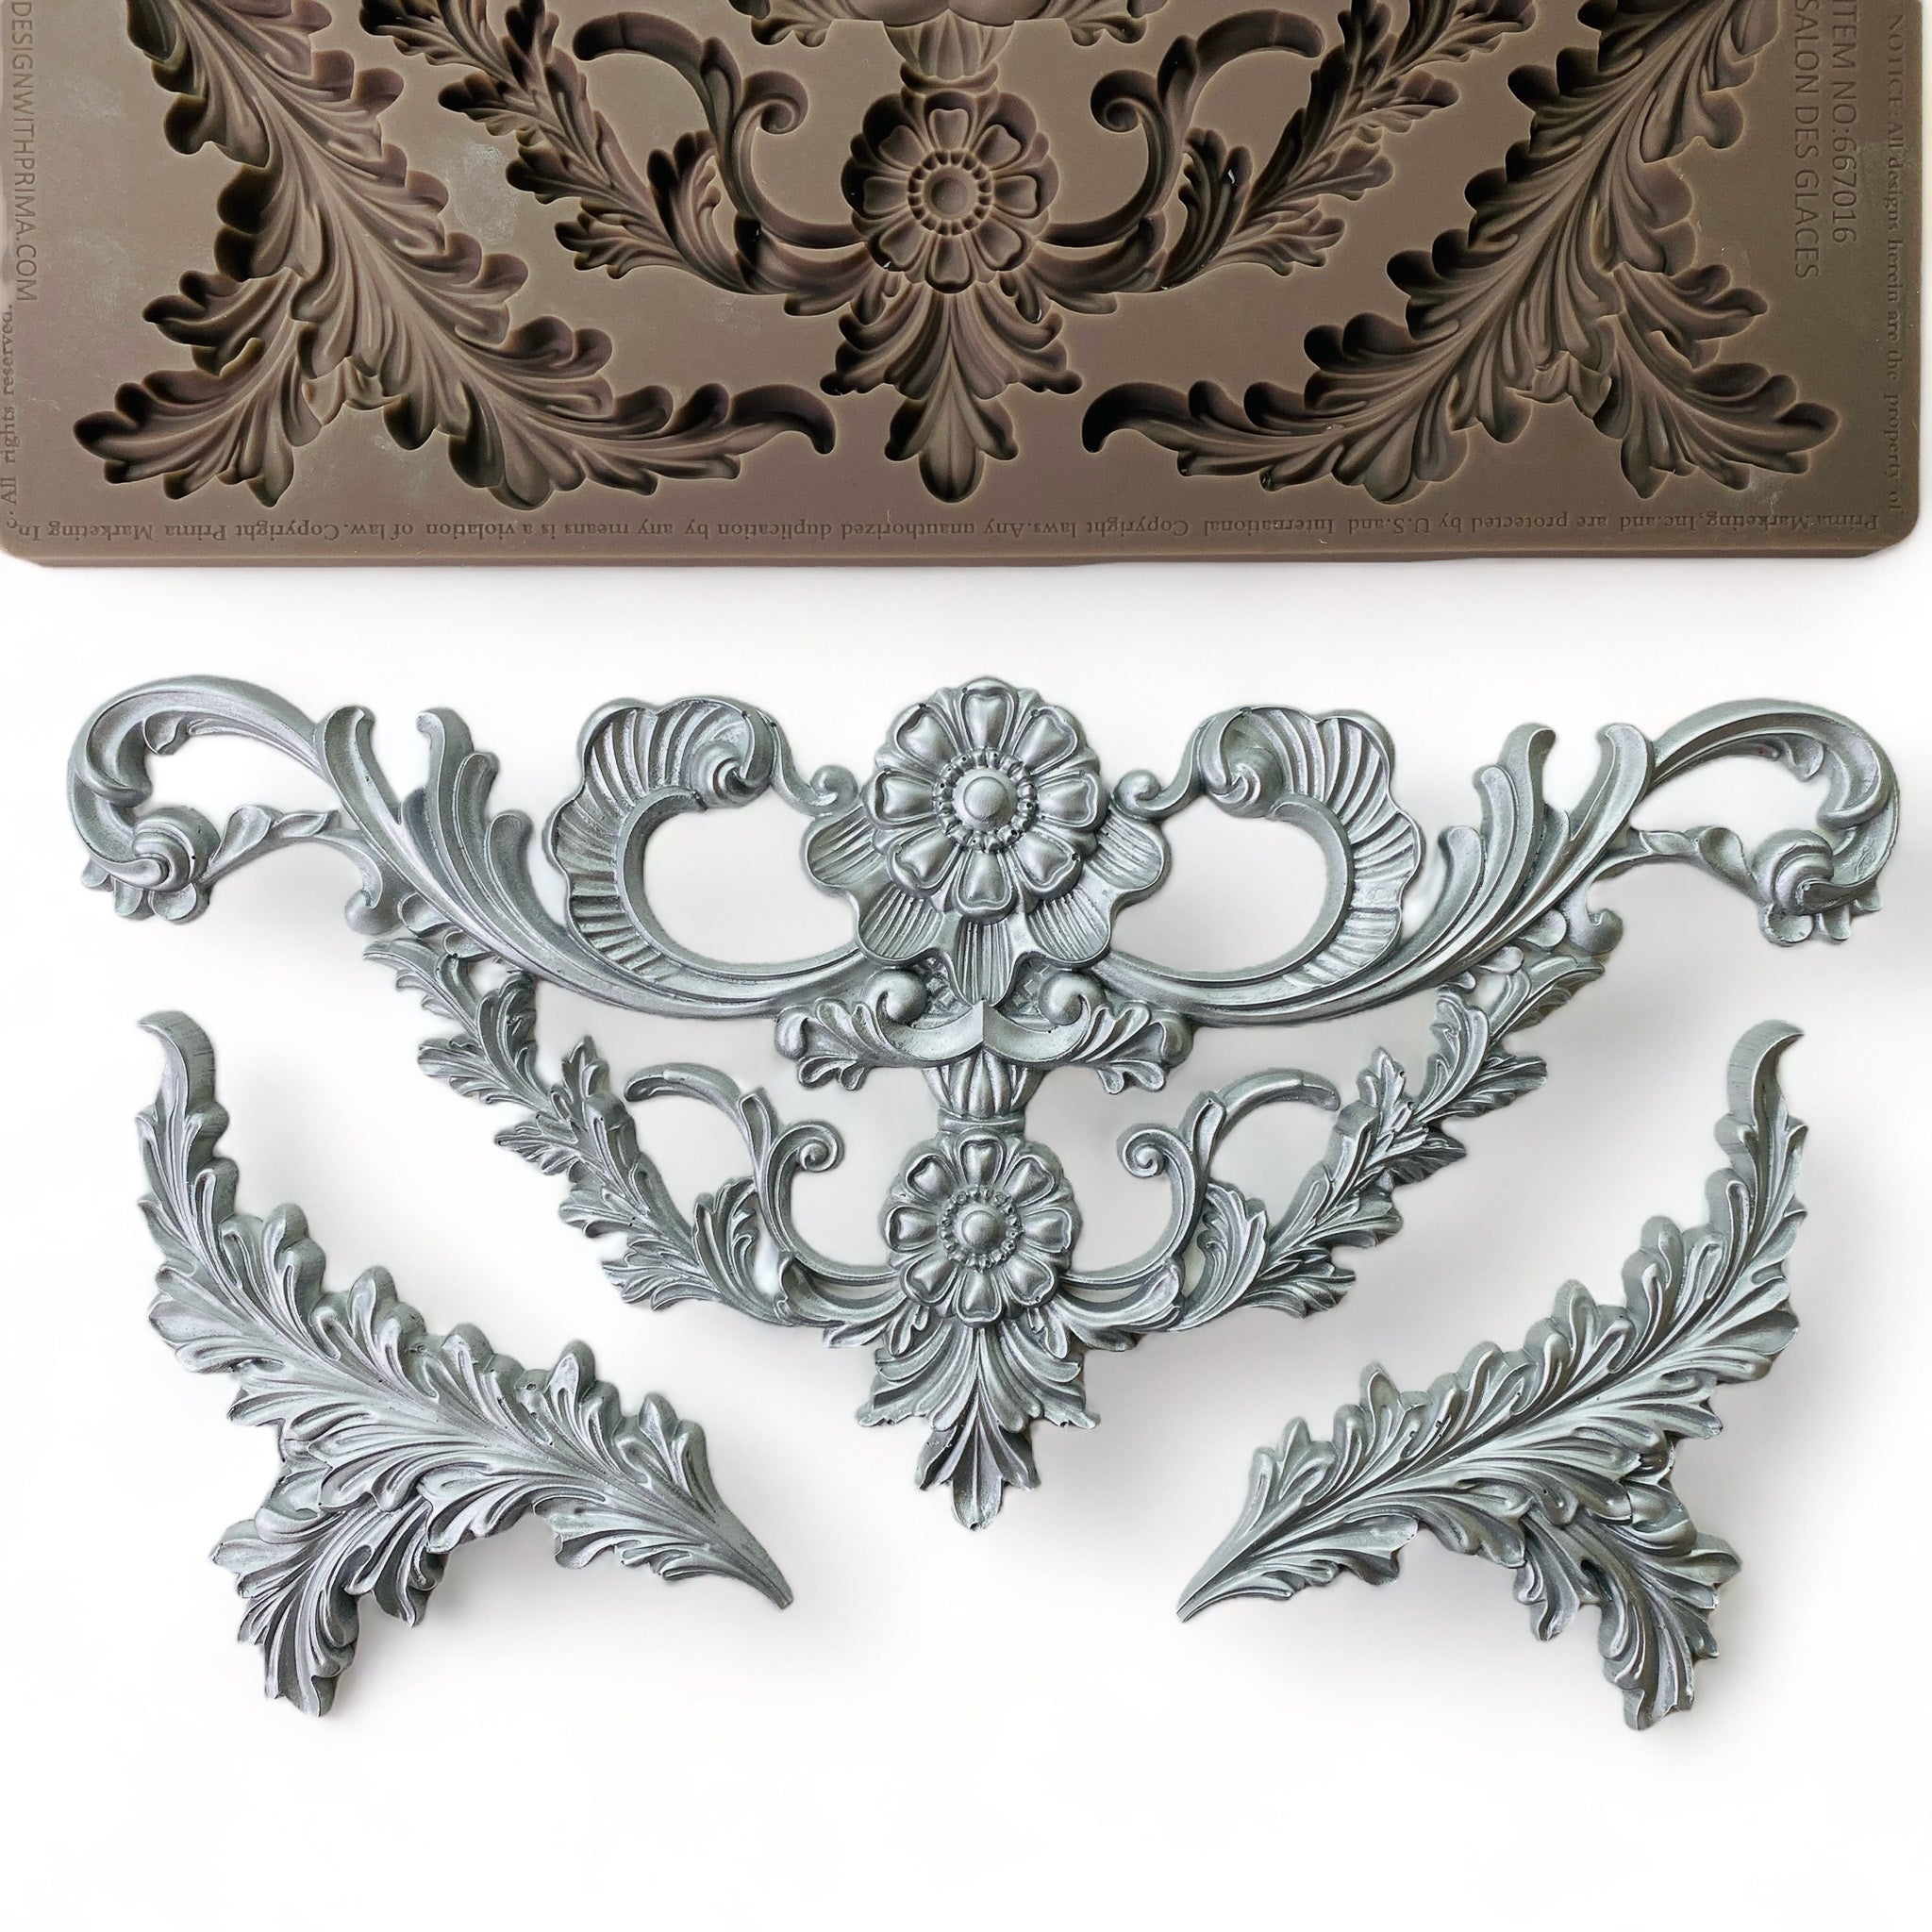 A brown silicone mold and silver-colored castings of a large ornate scroll floral leaf accent piece and 2 leaf plumes are against a white background.